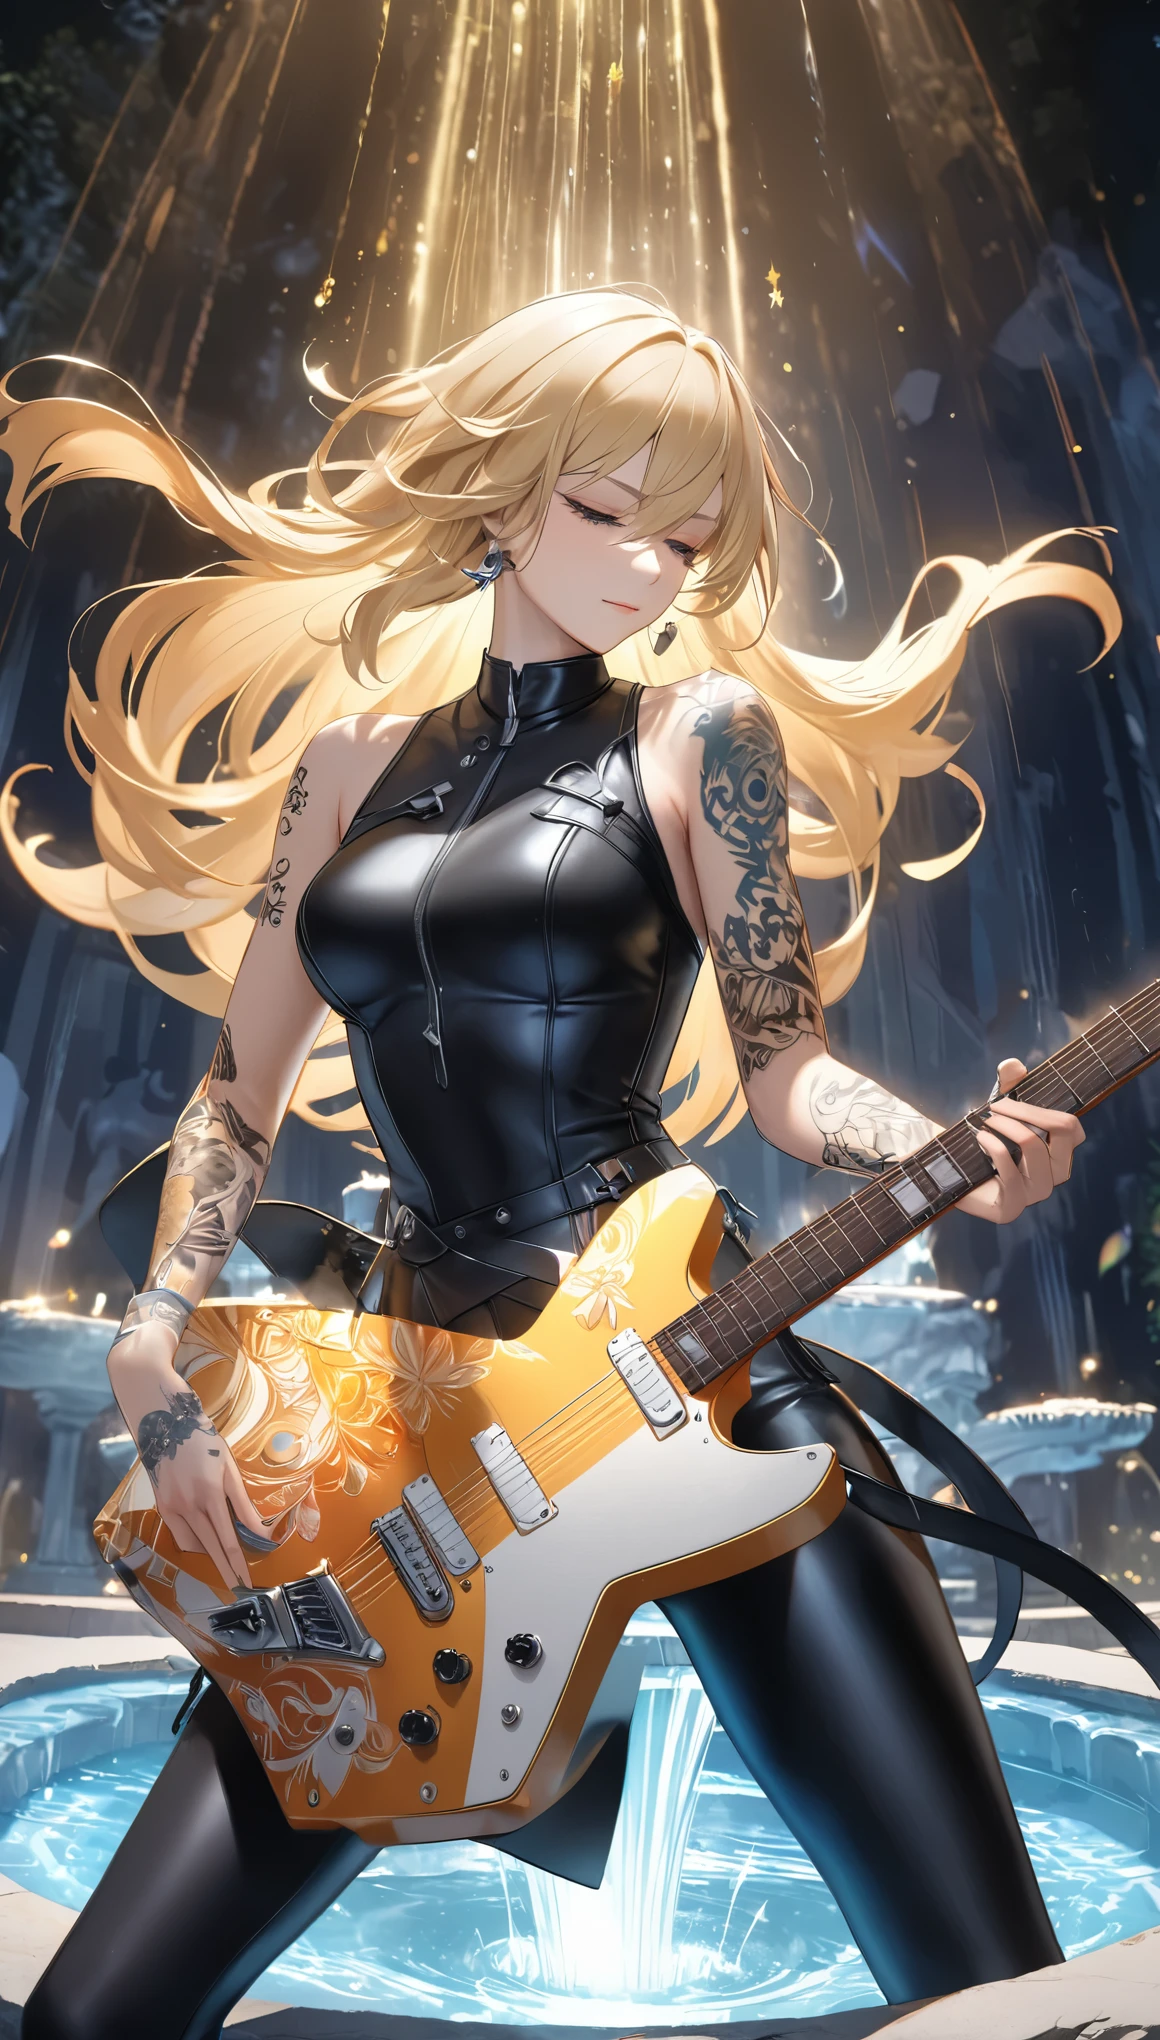 best quality, super fine, 16k, extremely detailed, 2.5D, delicate and dynamic, beautiful and cool rock guitarist playing guitar solo while standing in the center of stone fountain, cool guitar with (star-shaped mirror body), slim and tight leather outfit, tattoo on arms, blonde hair, cool standing posture, mysterious and fantastical light-up effect